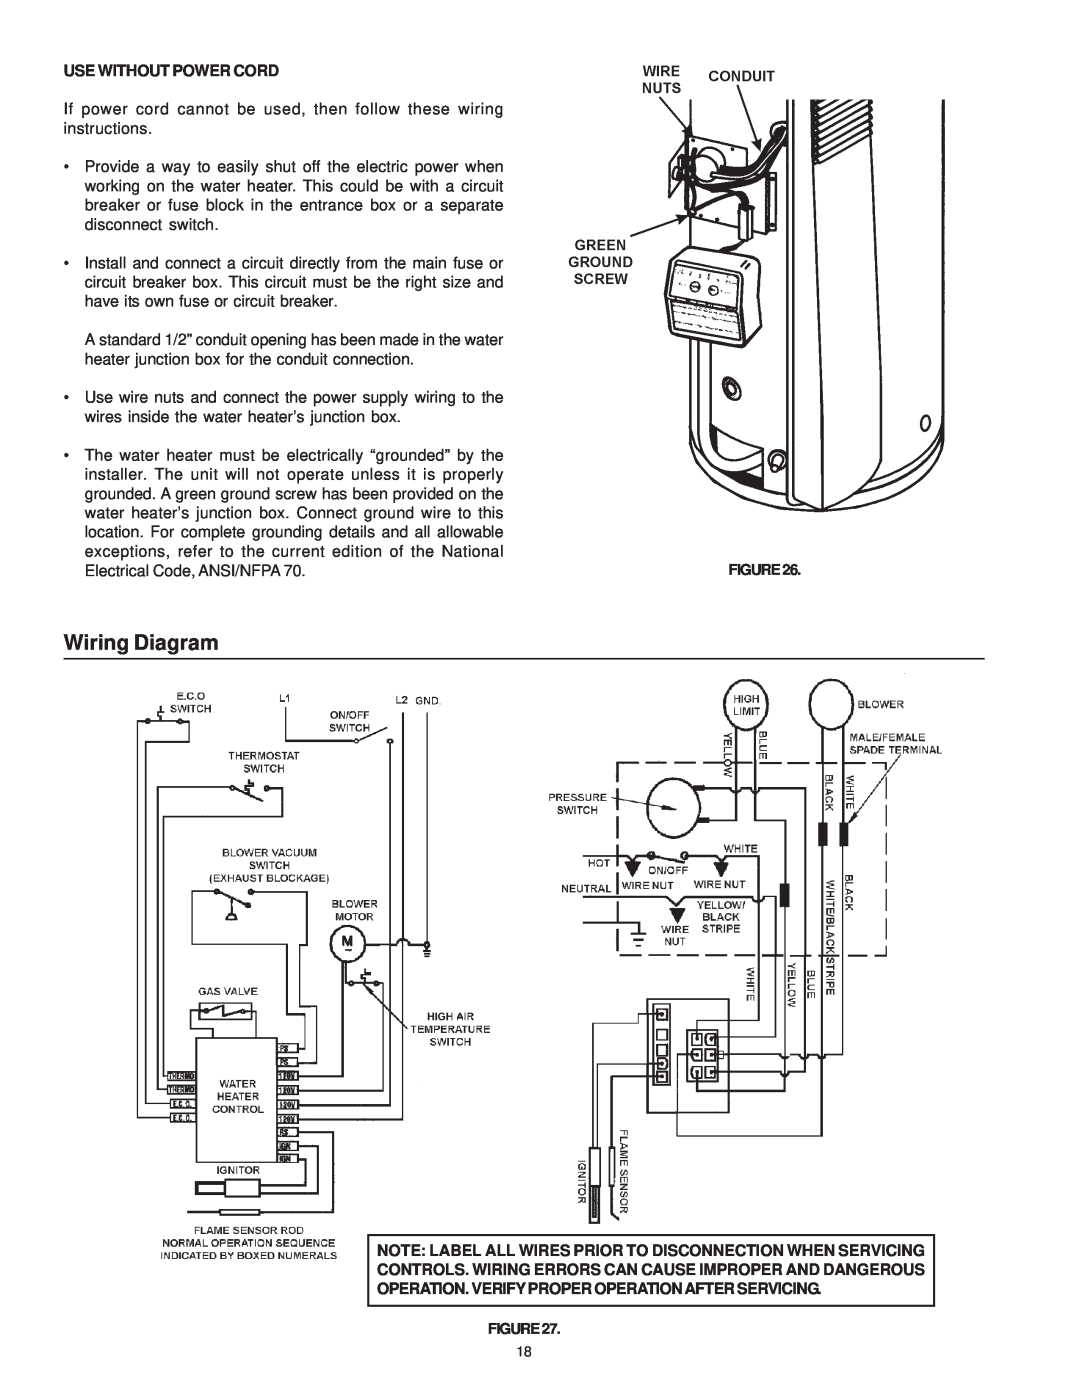 Maytag HRN31240P, HRN11250P, HRP31250P, HRP31240P manual Wiring Diagram, Use Without Power Cord, Electrical Code, ANSI/NFPA 